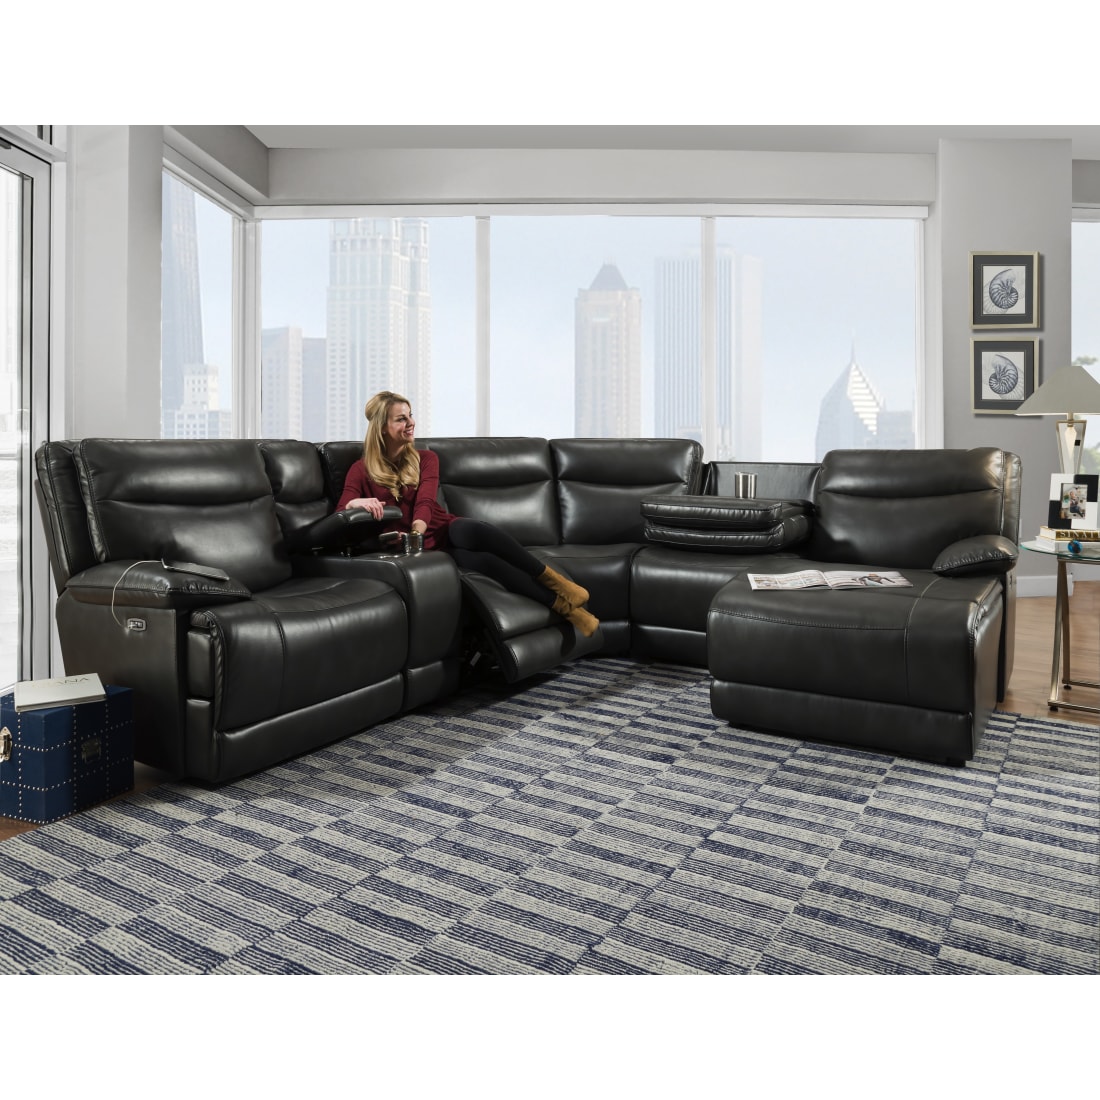 Illusions Sectional - Left Side Facing Sofa & Right Side Facing Loveseat